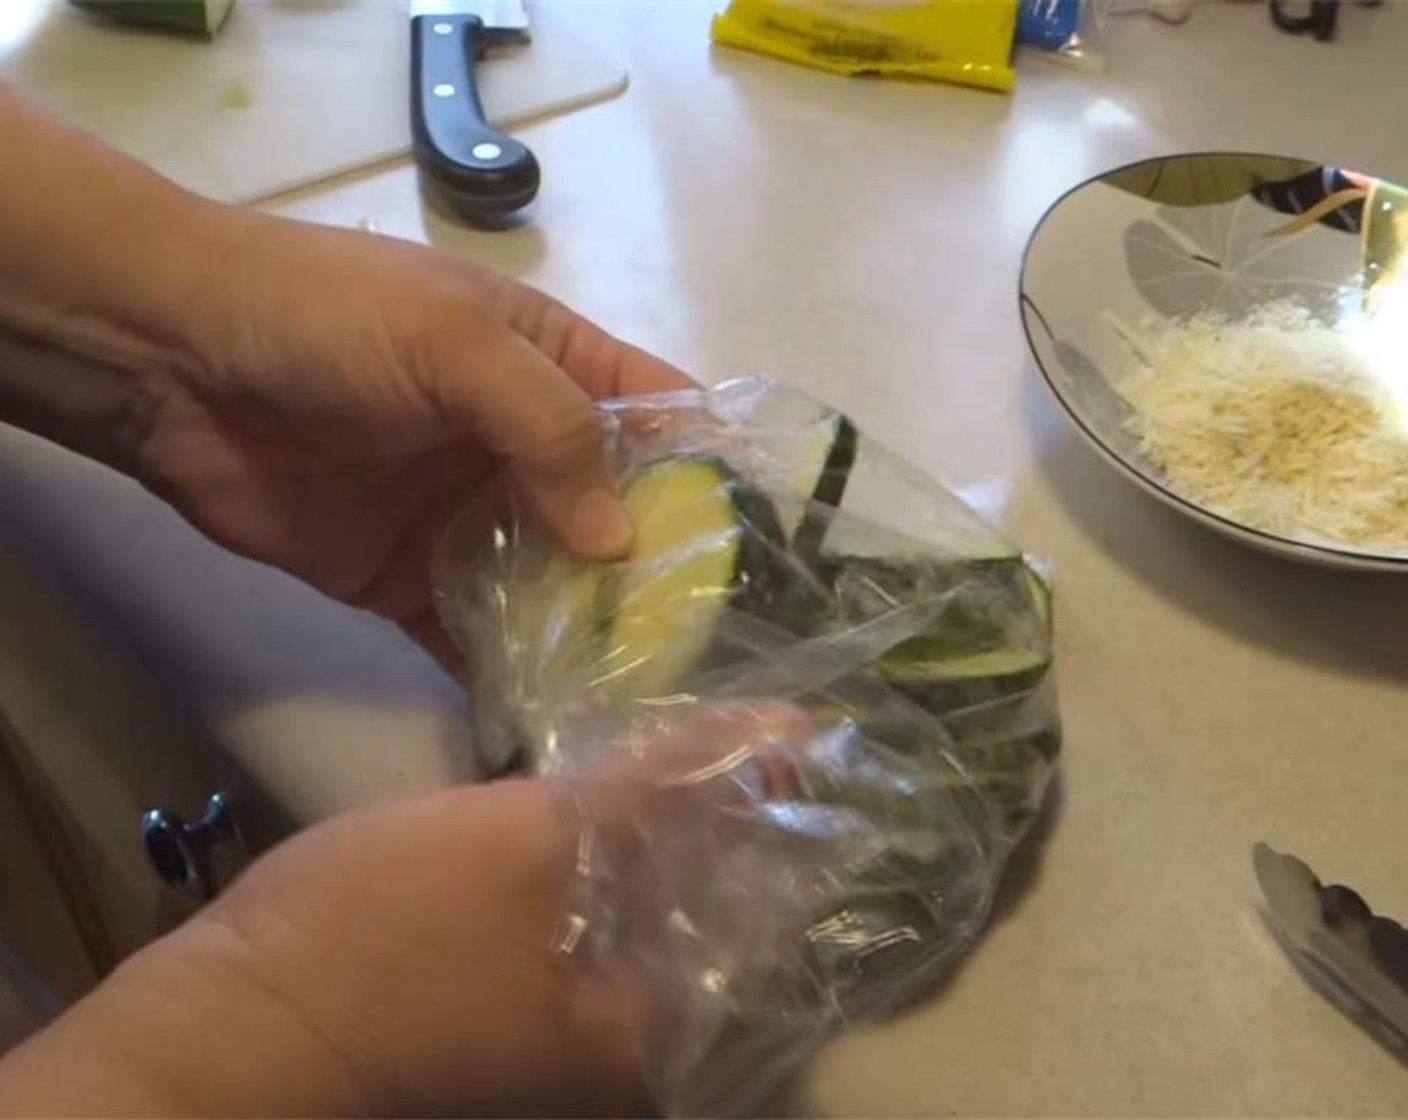 step 3 Place 1/4 thick slices of Zucchini (3 1/2 cups) in a plastic bag with Olive Oil (1 Tbsp) and shake to coat evenly.